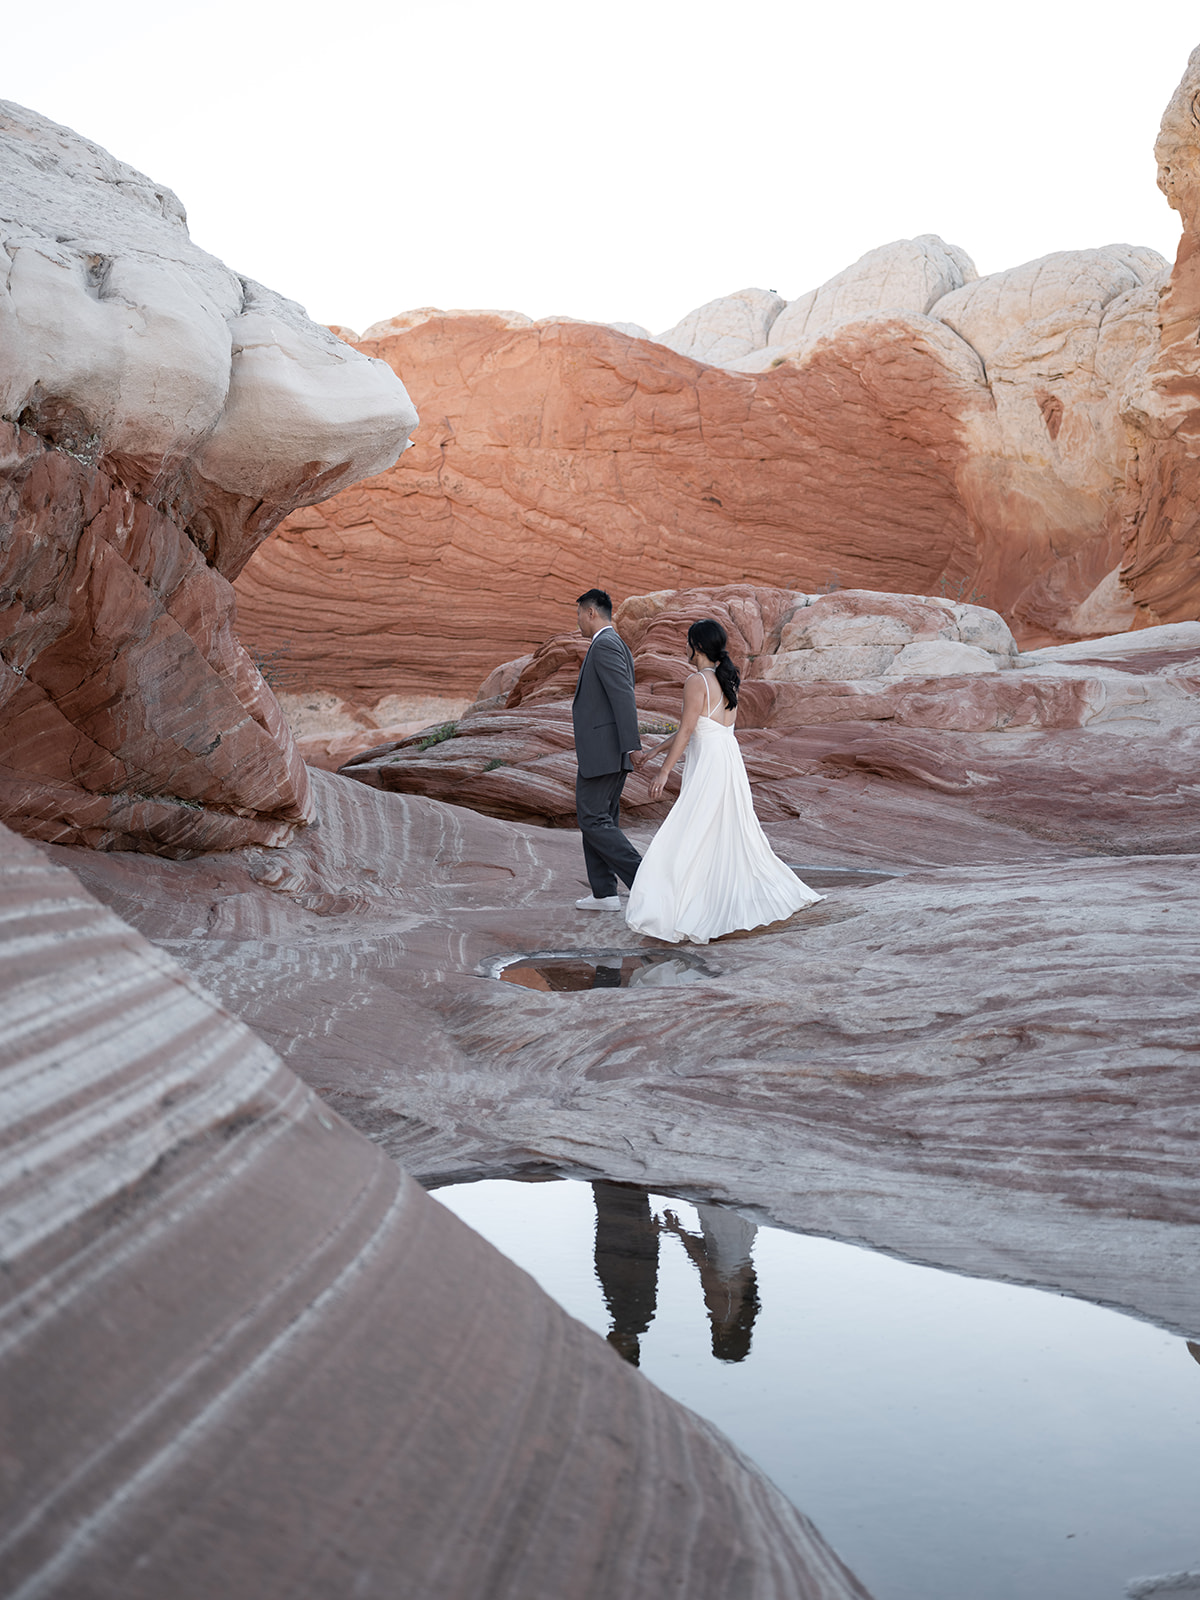 Couple eloping in the stunning and secluded location of White pocket arizona 